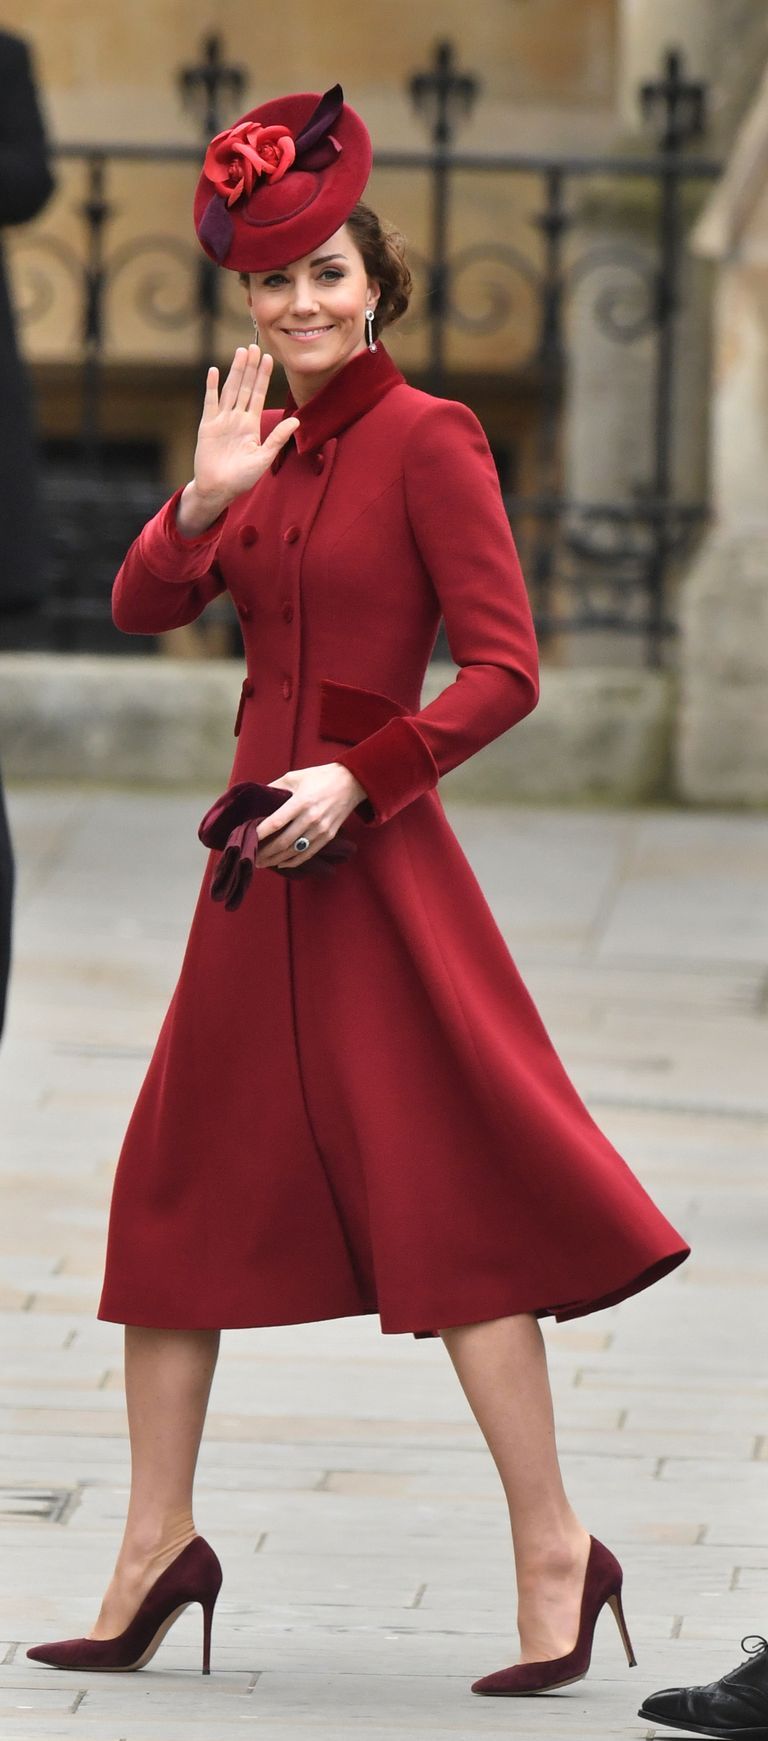 Kate Middleton Wears Red Dress at Commonwealth Day Service 2020